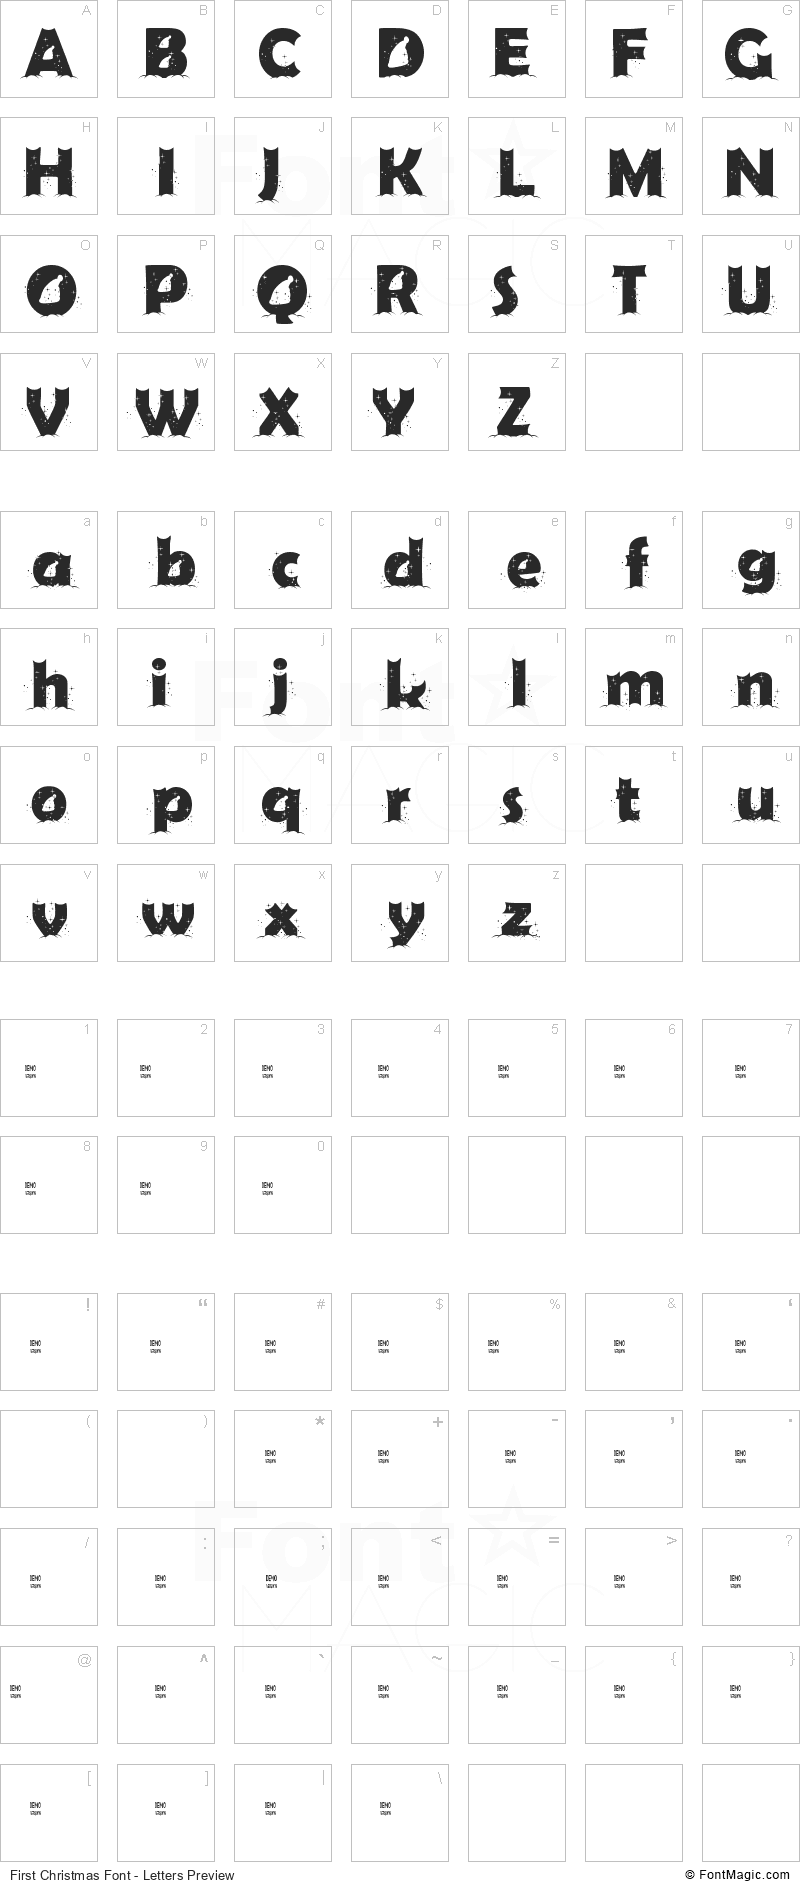 First Christmas Font - All Latters Preview Chart